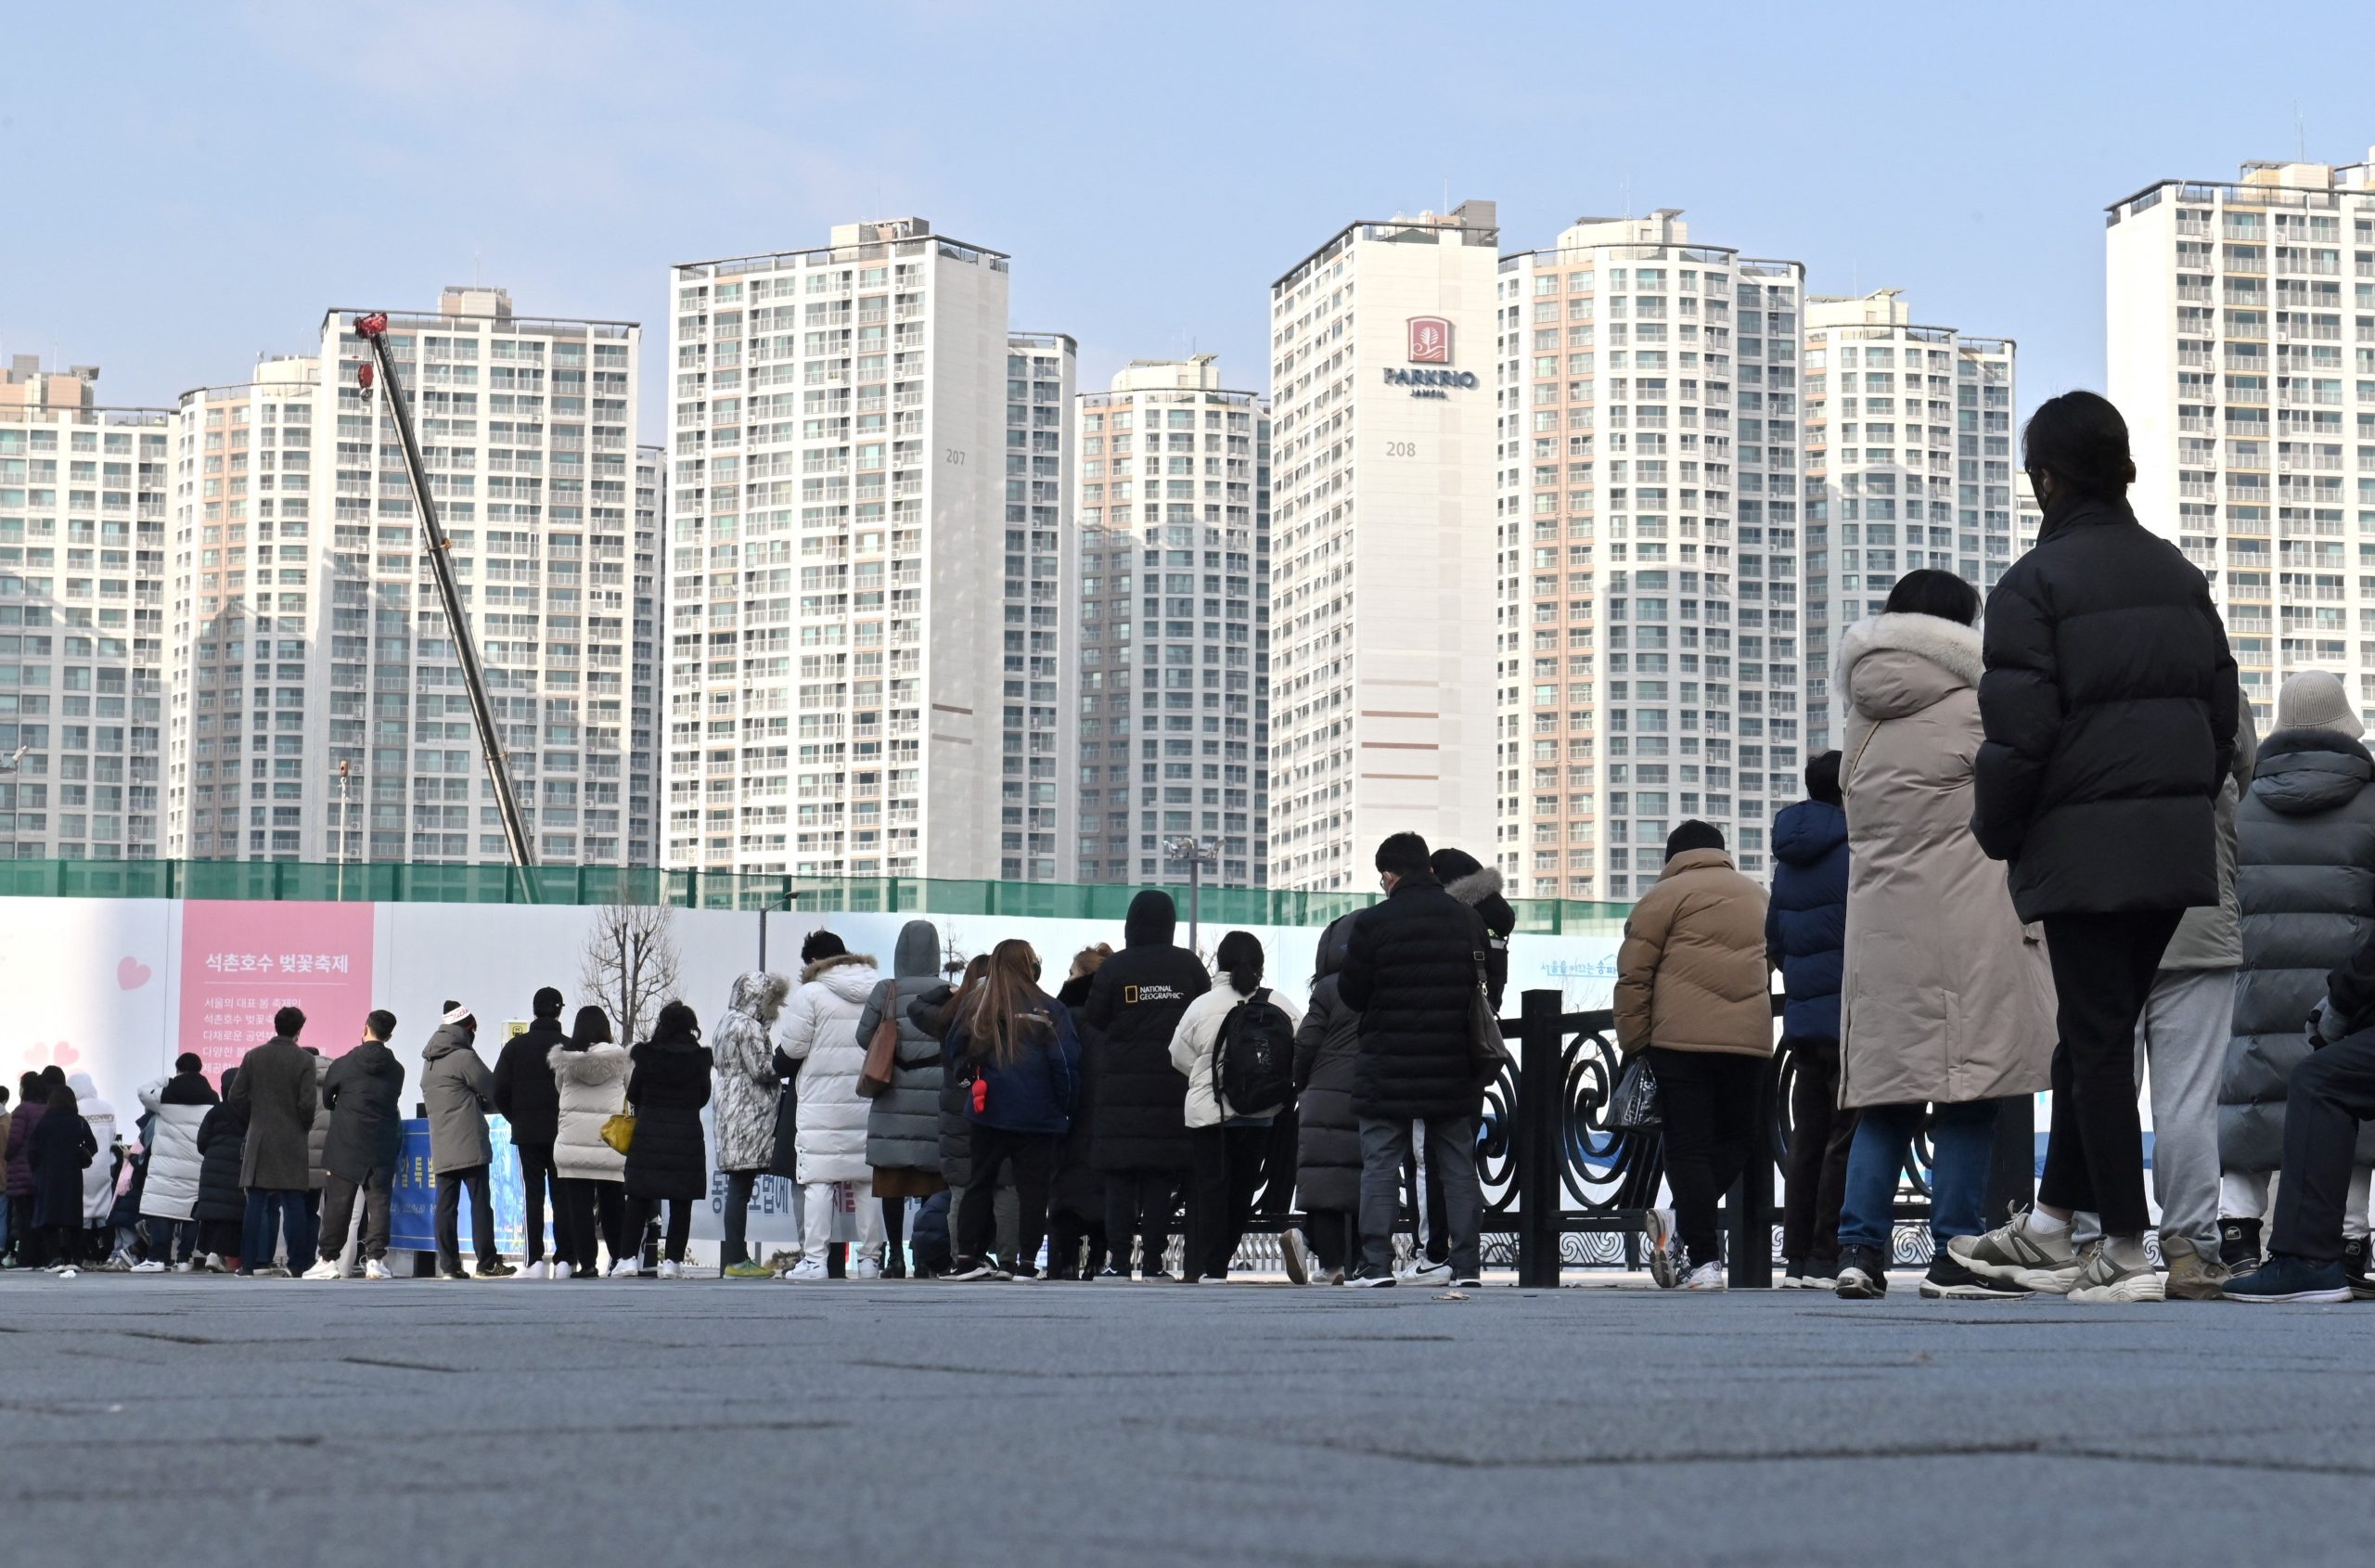 People wait in line to get tests for covid-19 in Seoul, South Korea on December 14, 2021. (Photo: Jung Yeon-Je/AFP, Getty Images)